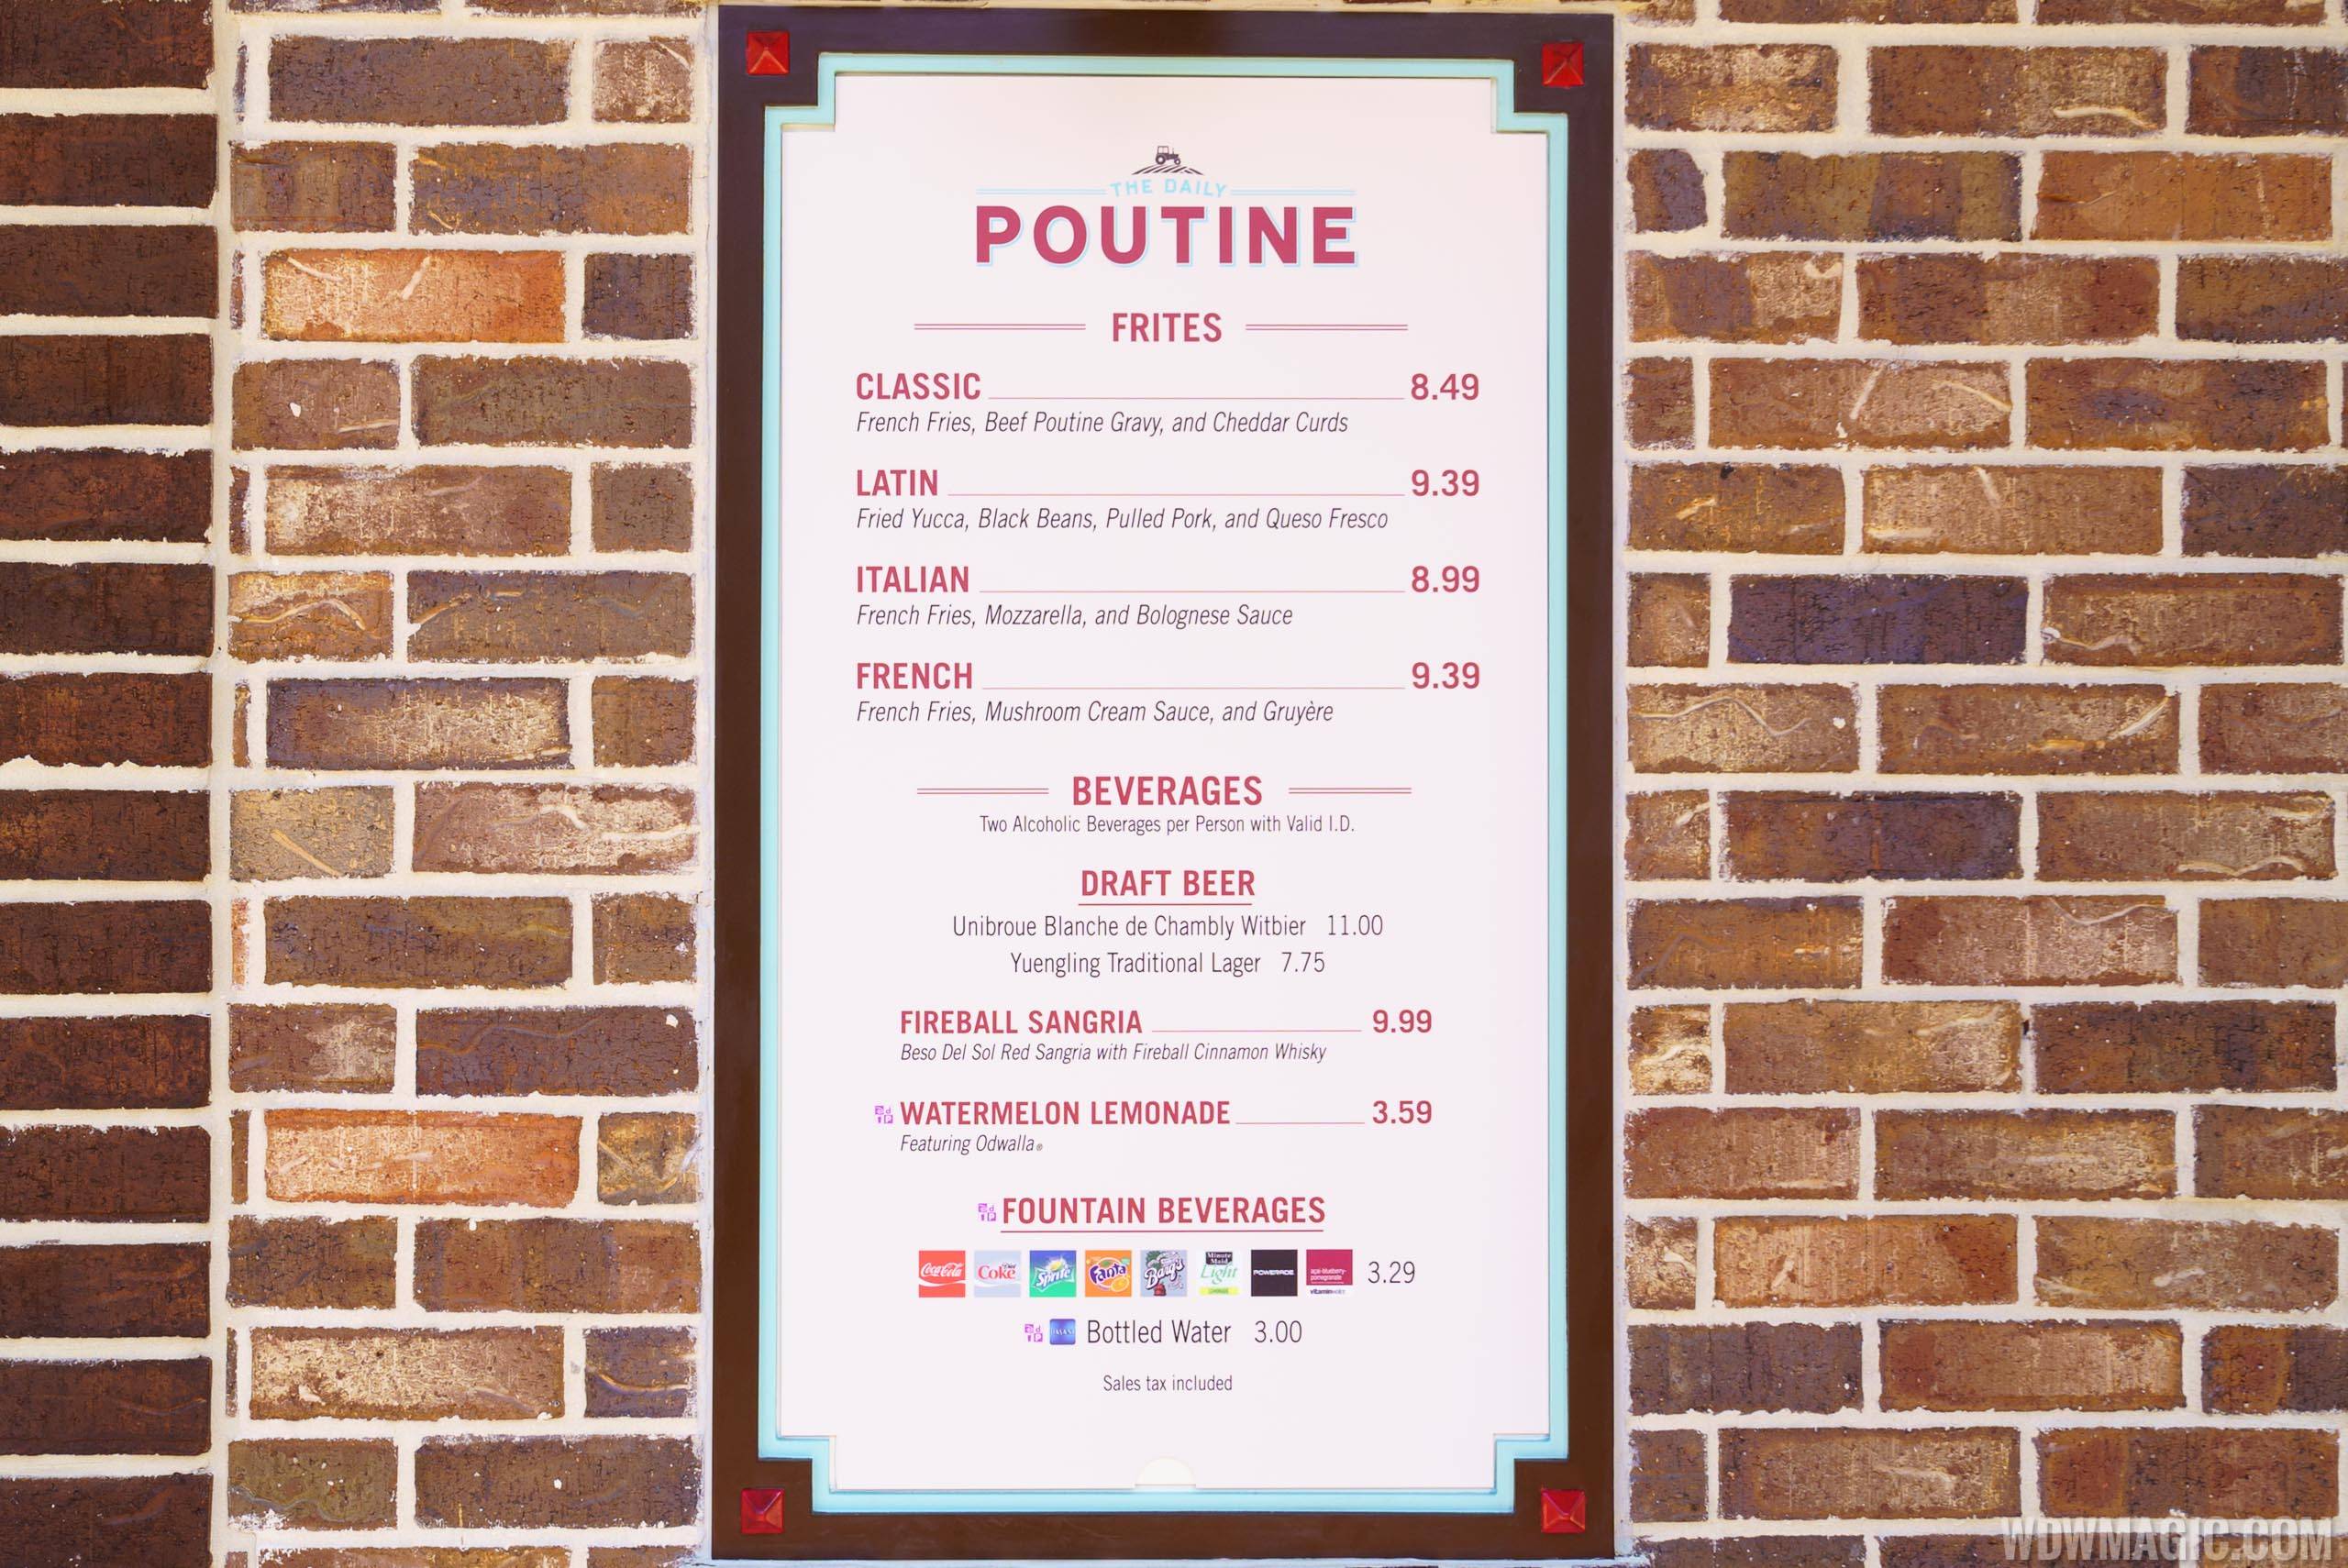 The Daily Poutine overview